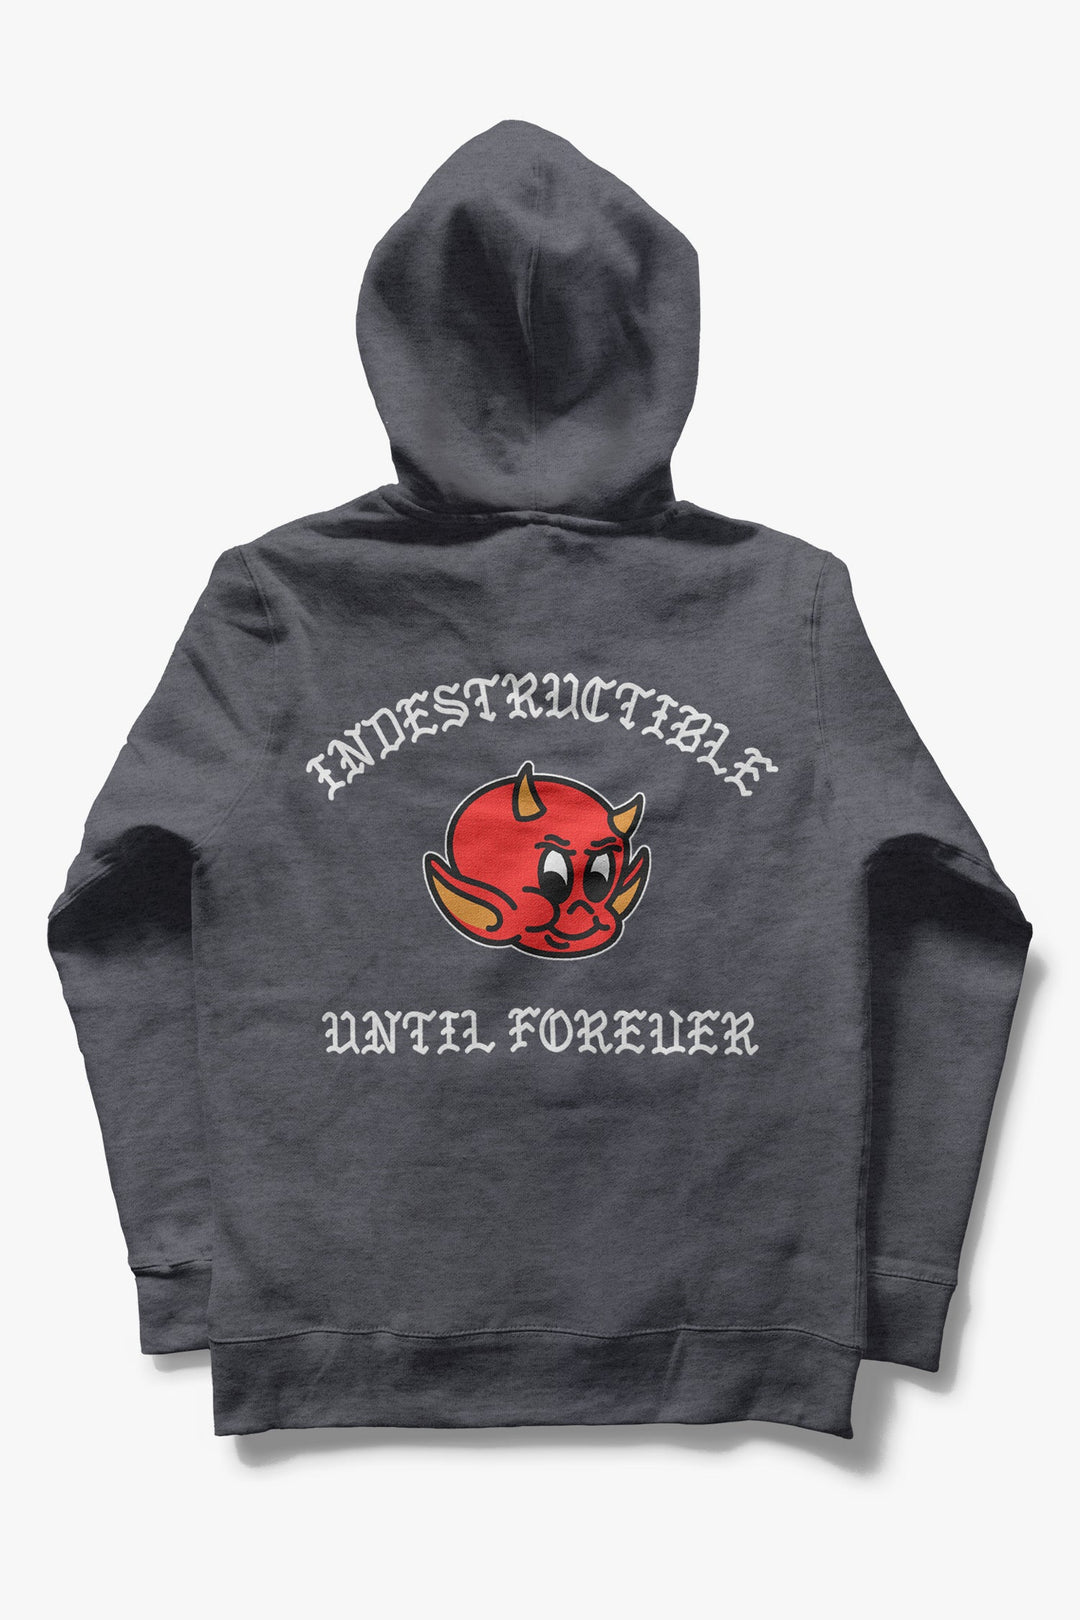 Hot Stuff Forever Hoodie - Indestructible MFG